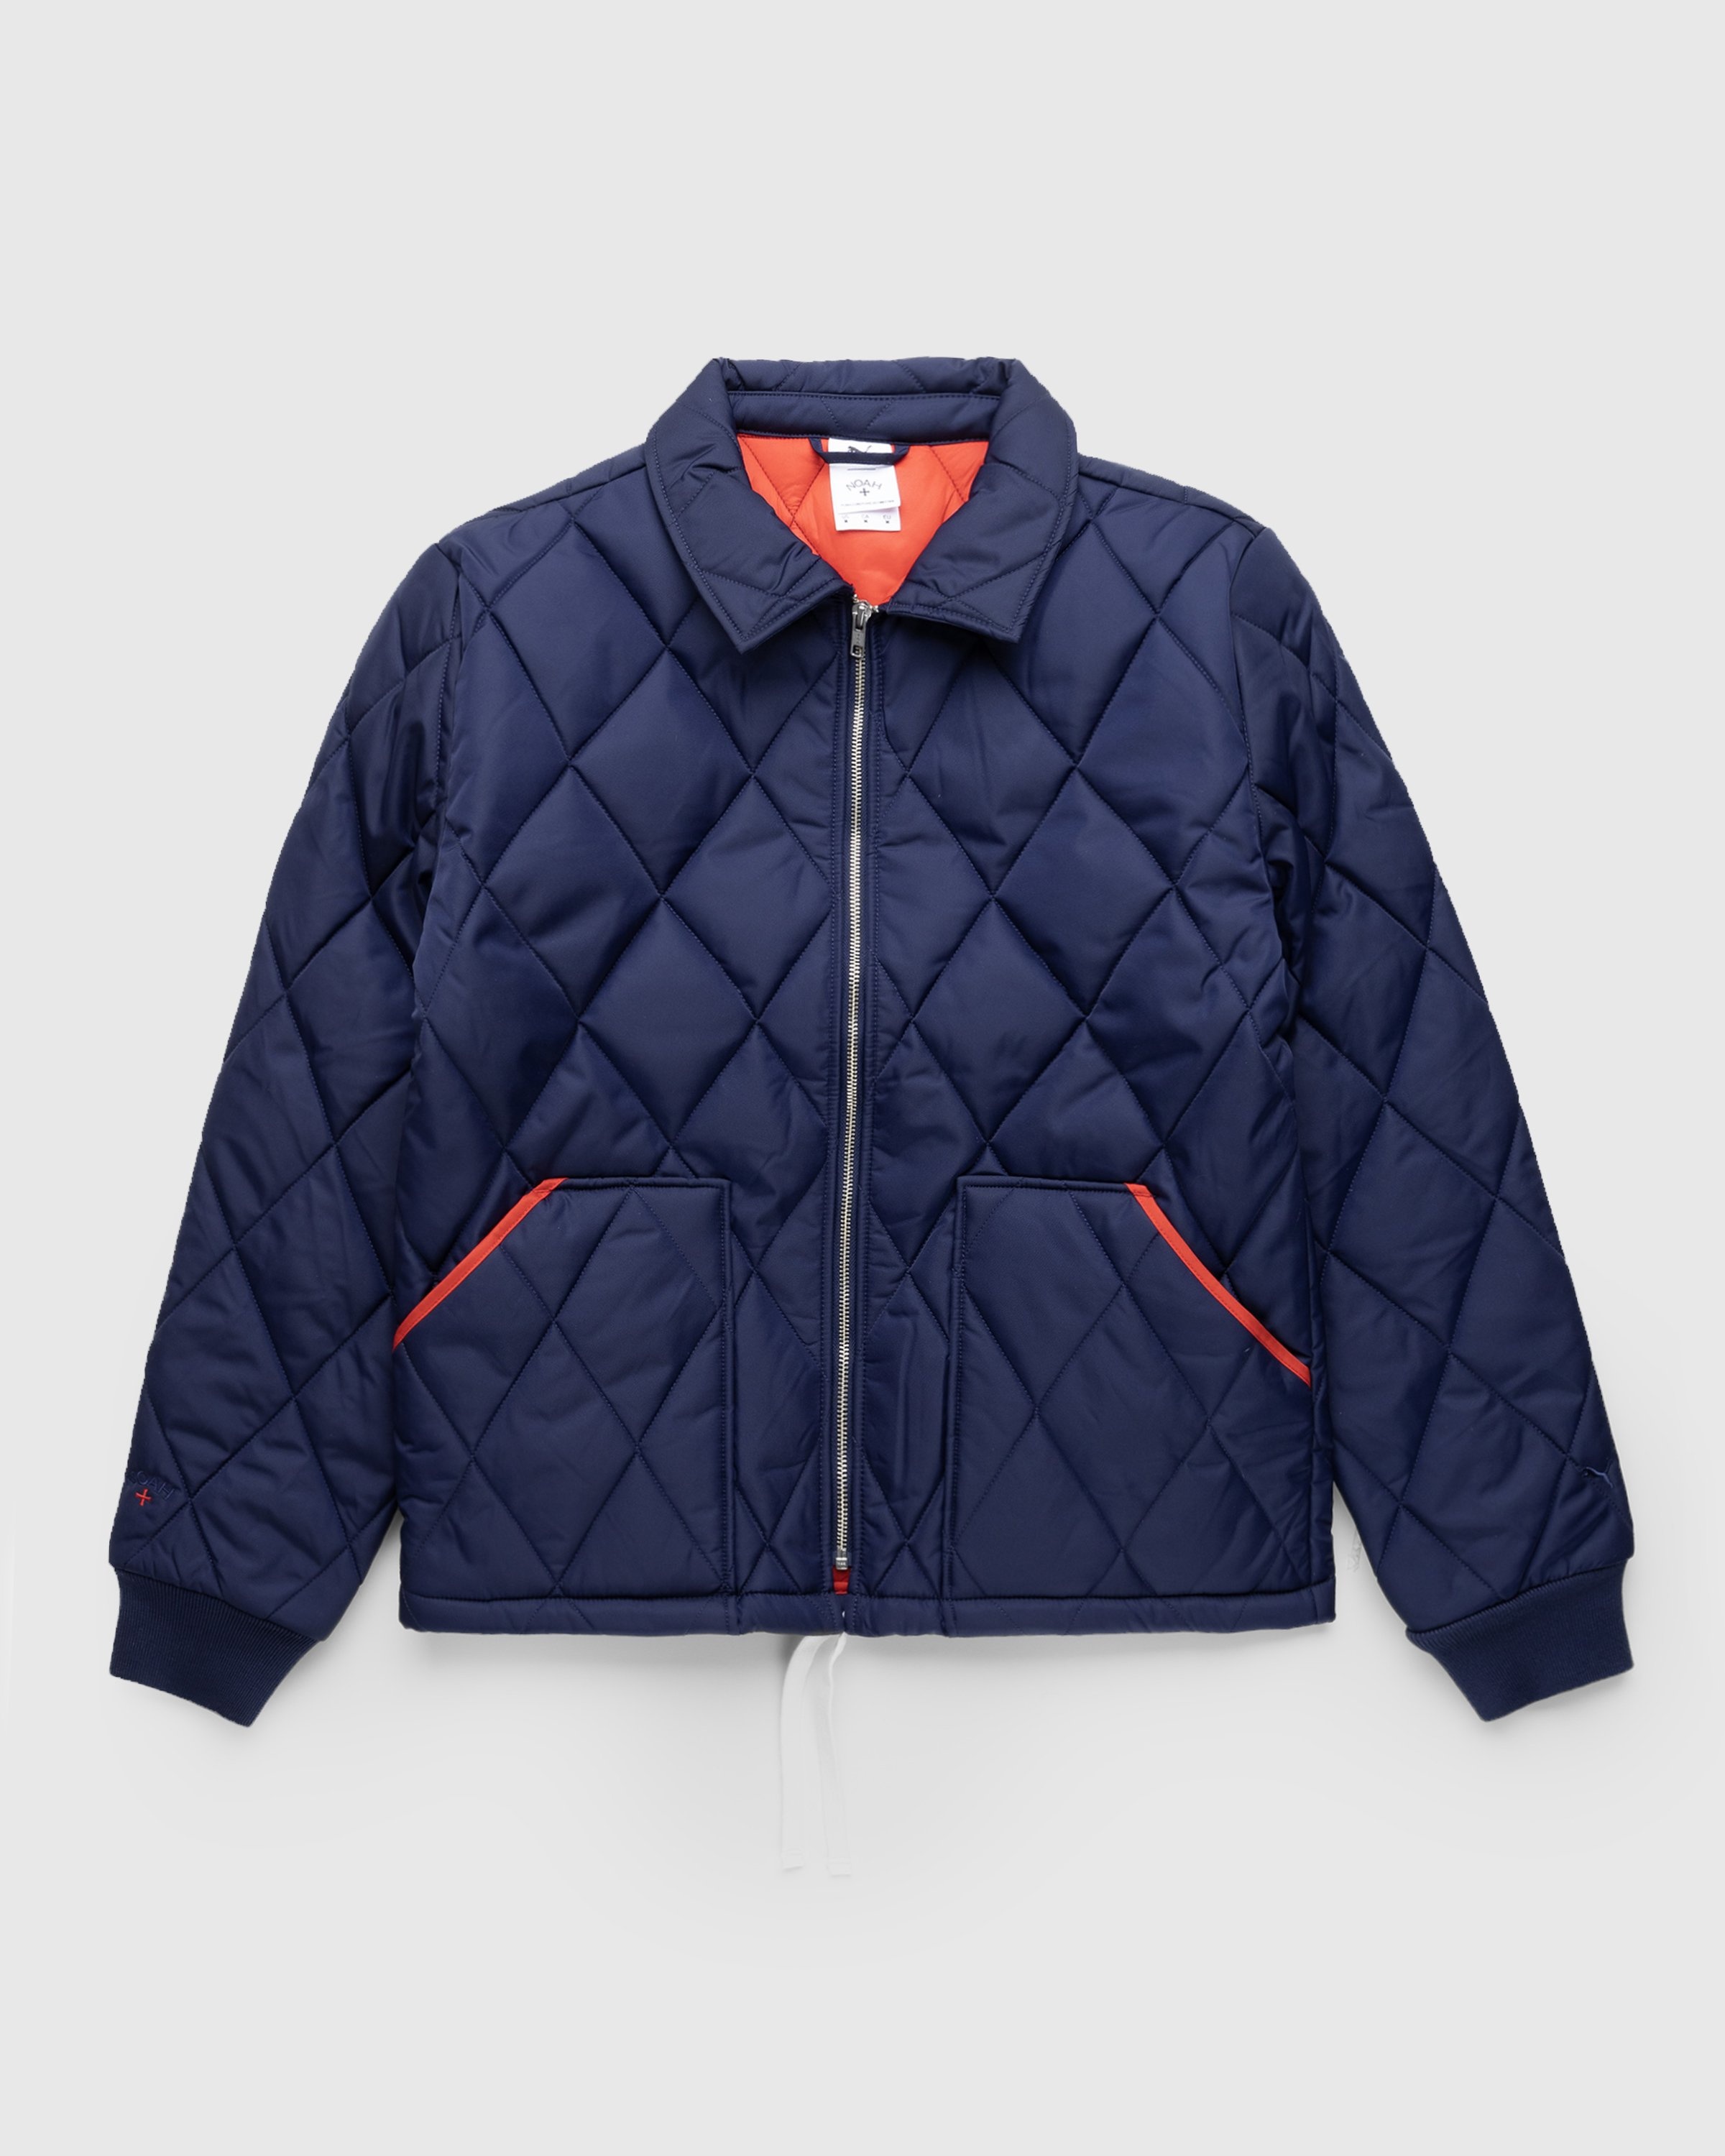 Puma x Noah – Water-Repellent Quilted Jacket Navy - Outerwear - Blue - Image 1